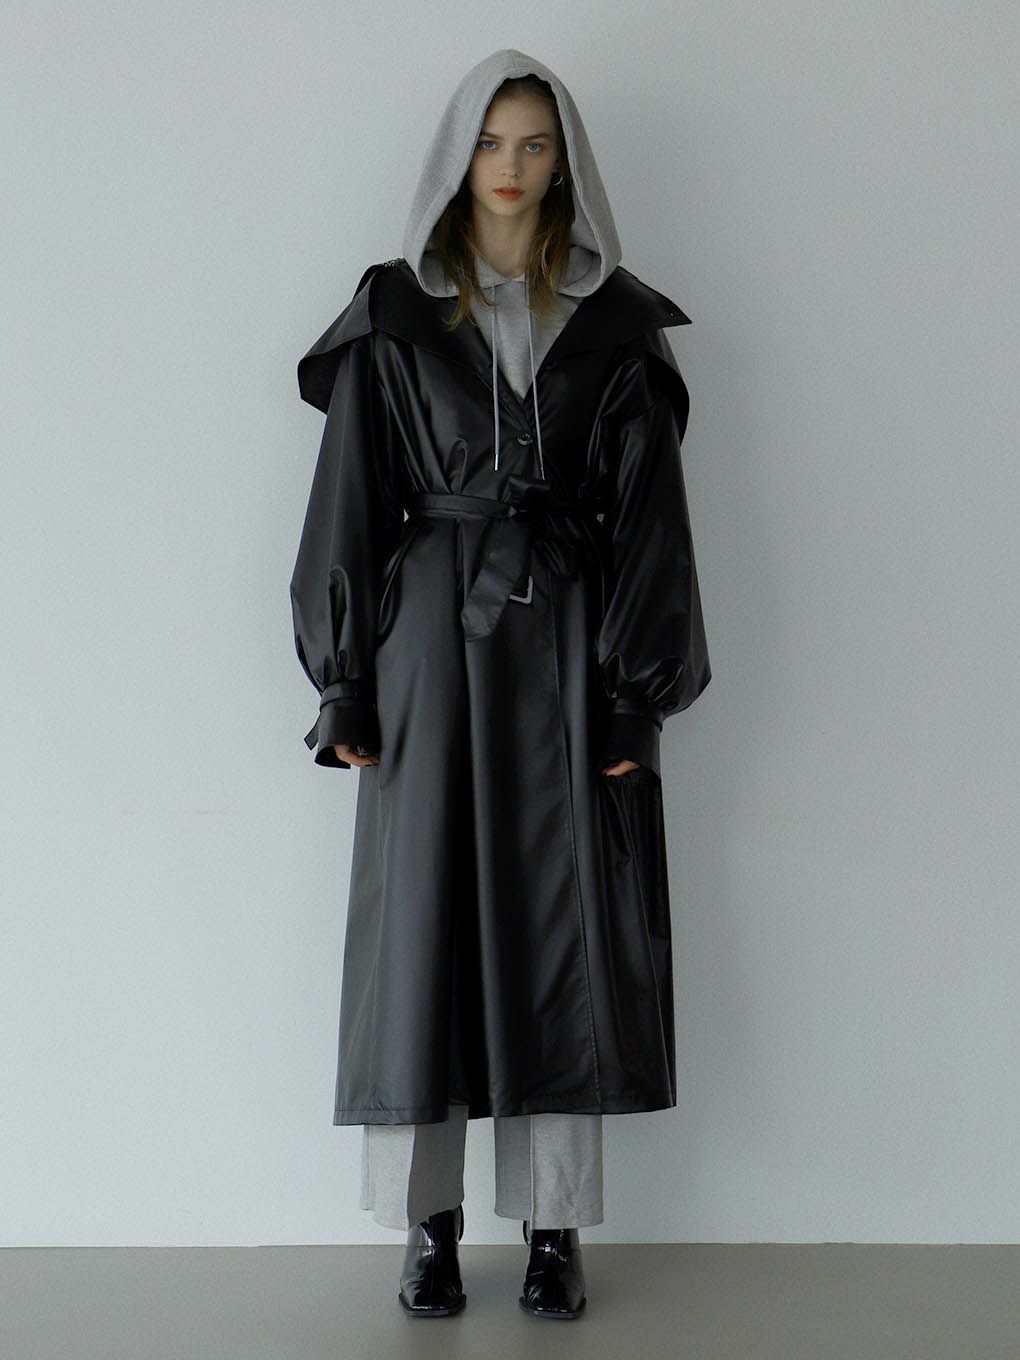 y2kmelt the lady　wing collar trench coat